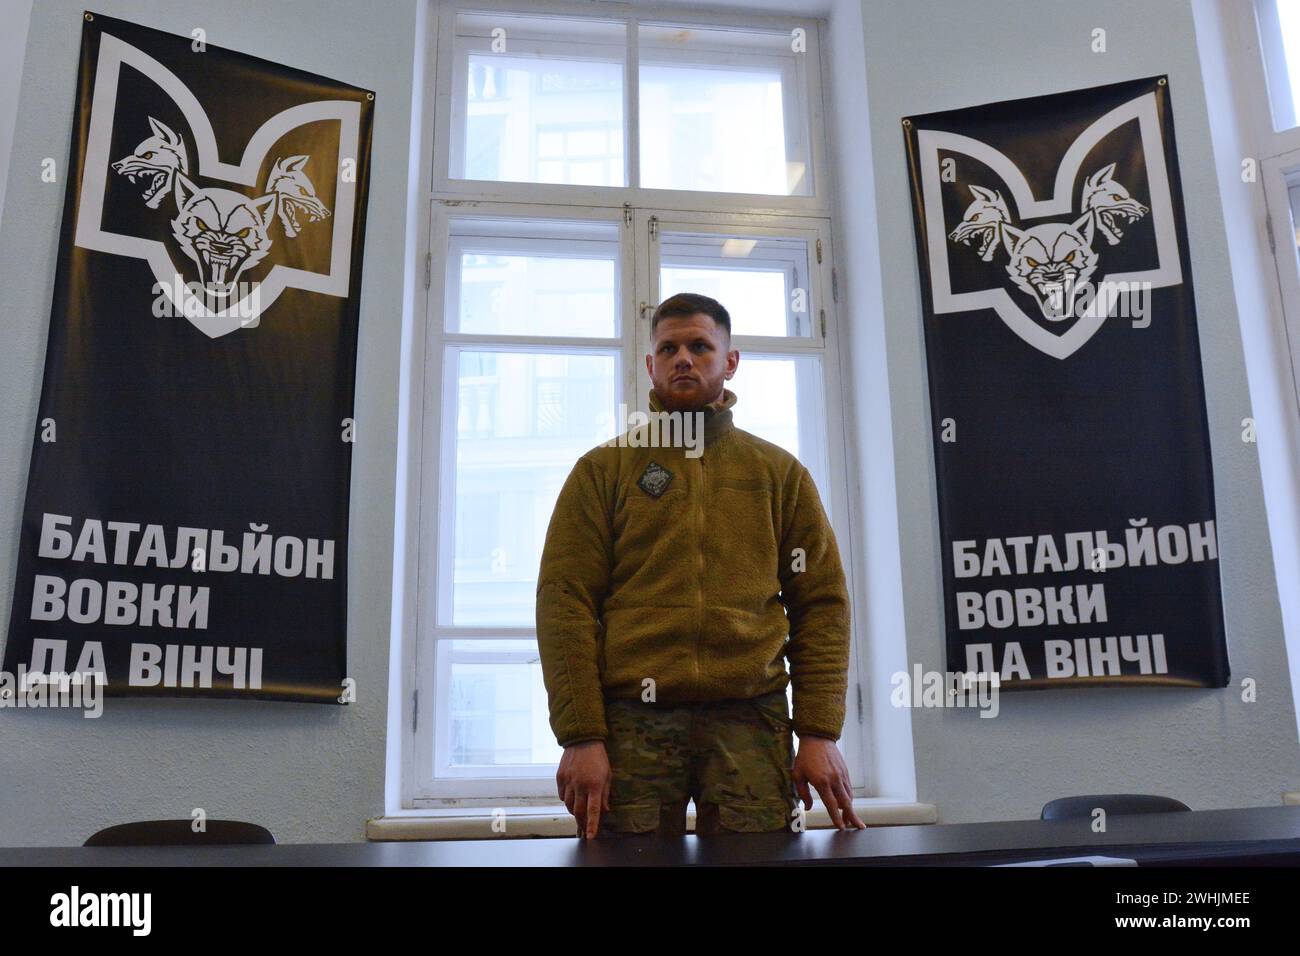 Serhiy Filimonov (call sign Filya) an officer of the Armed Forces of Ukraine is a commander of the 'Da Vinci Wolves' battalion and is seen during the opening of the recruiting center for the recruitment of volunteers. Fighters of the 'Da Vinci Wolves' battalion announced the opening of a recruiting center for the recruitment of fighters to resist Russia's military aggression in Kyiv. Stock Photo